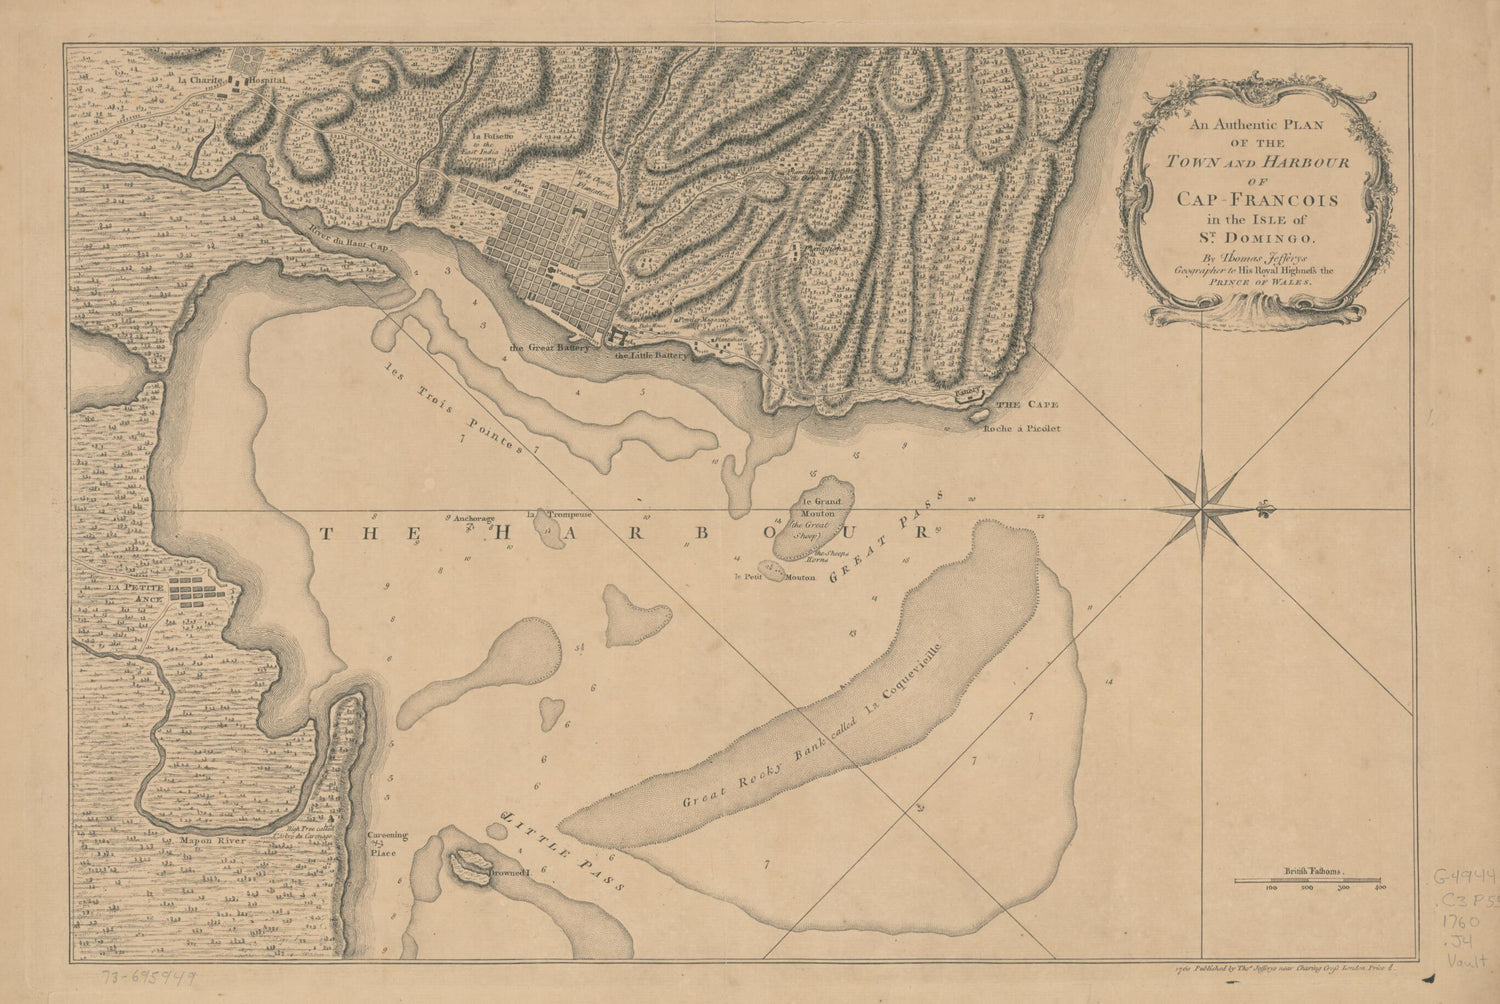 This old map of François In the Isle of St. Domingo from 1760 was created by Thomas Jefferys in 1760